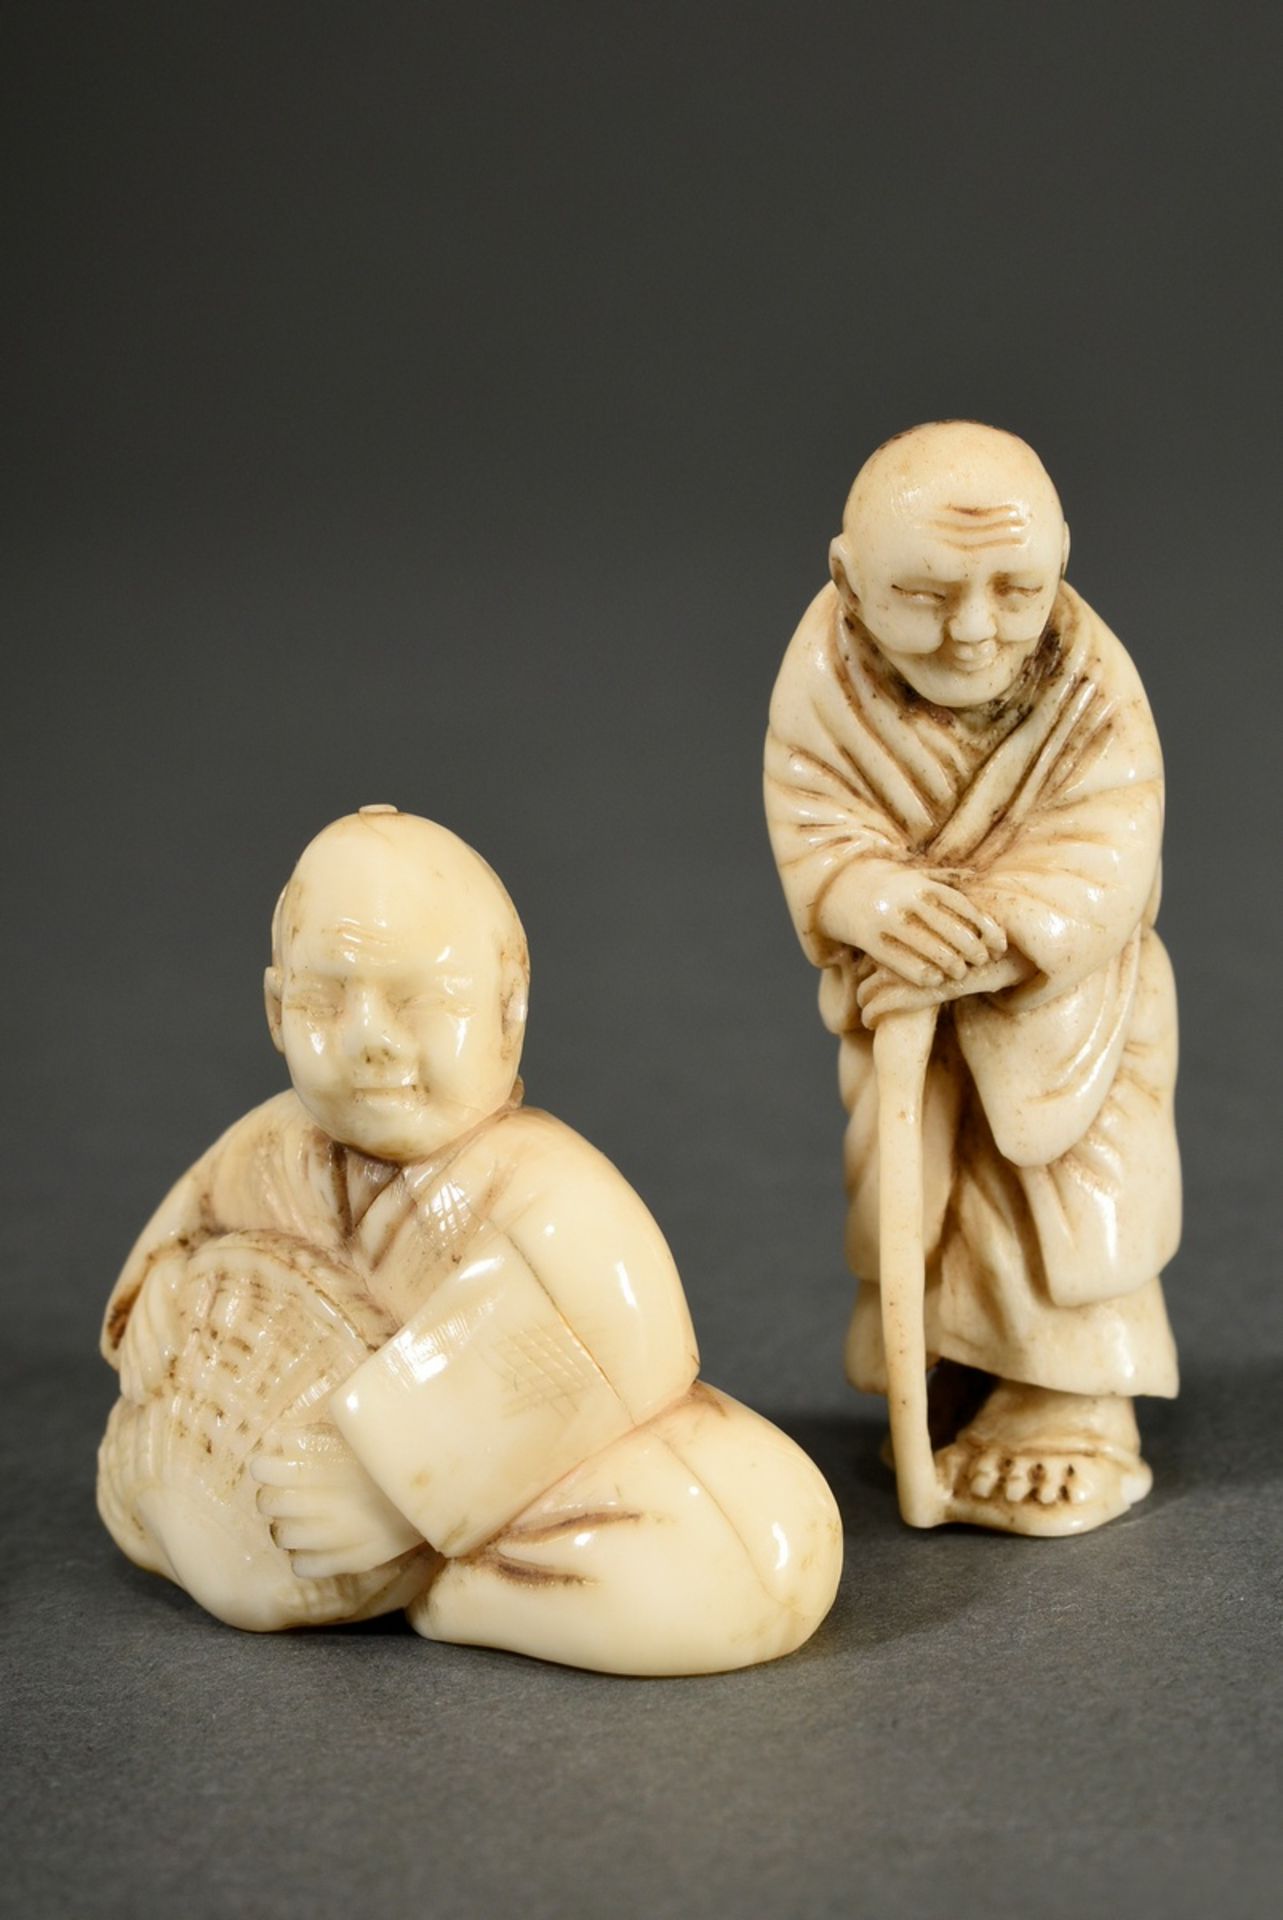 2 Various animal tooth netsuke: ‘Blind man with stick’ (h. 4.8cm) and ‘Sitting man with clam’ (h. 3